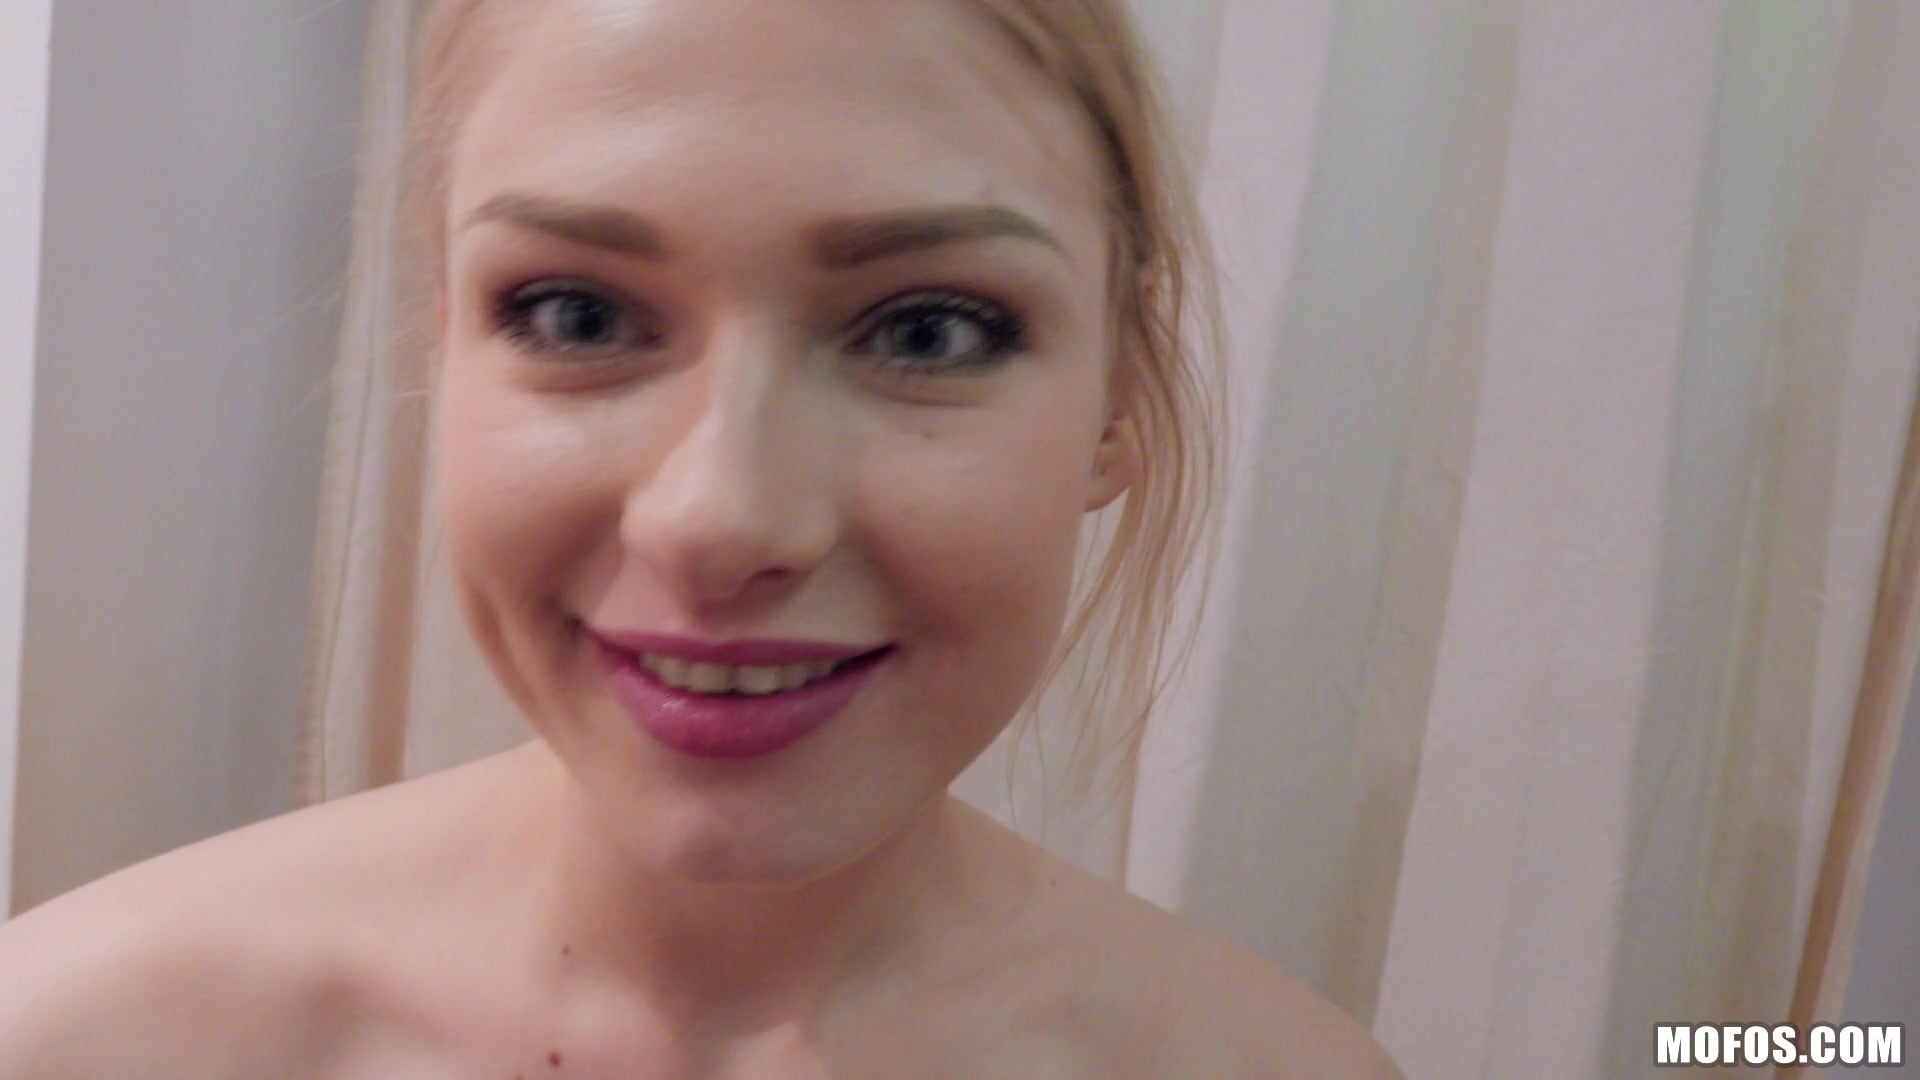 Mofos 'Blonde Filled With Customer Service' starring Lucy Heart (Photo 1376)